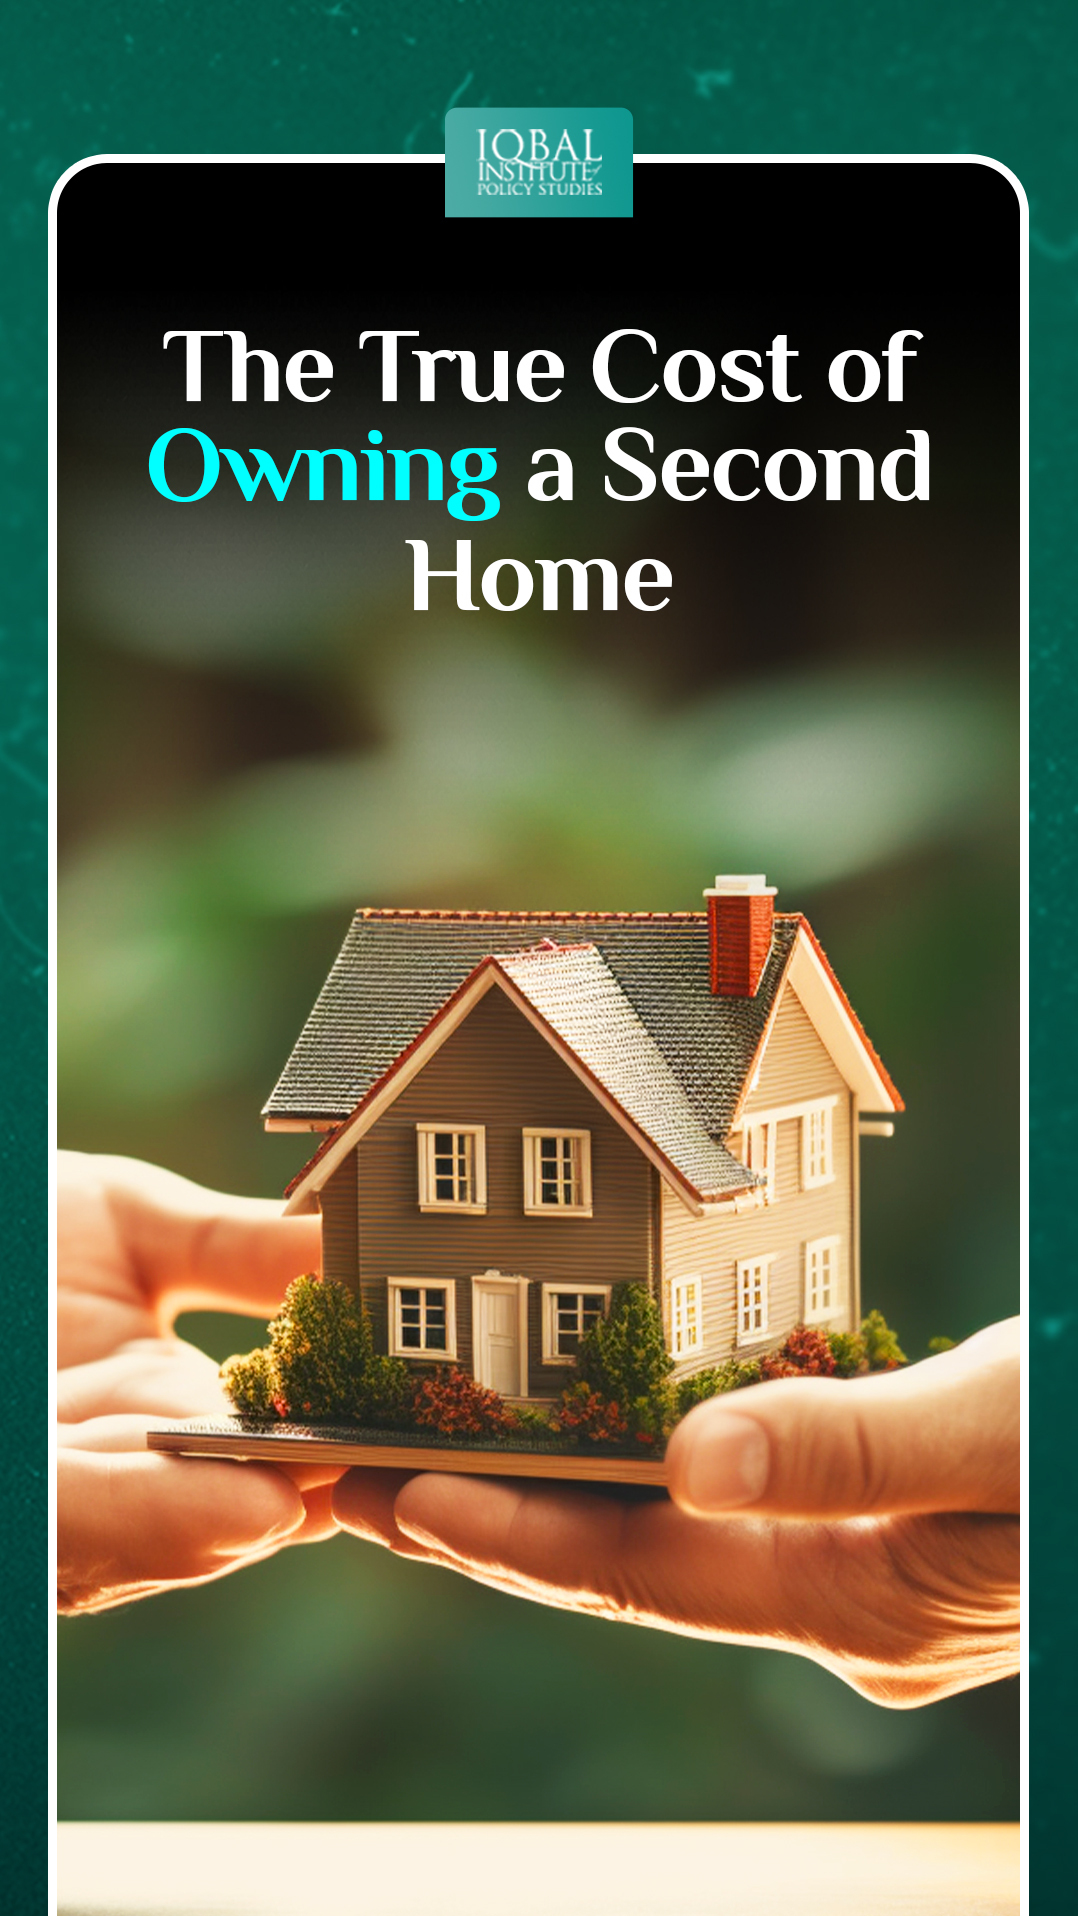 The True Cost of Owning a Second Home